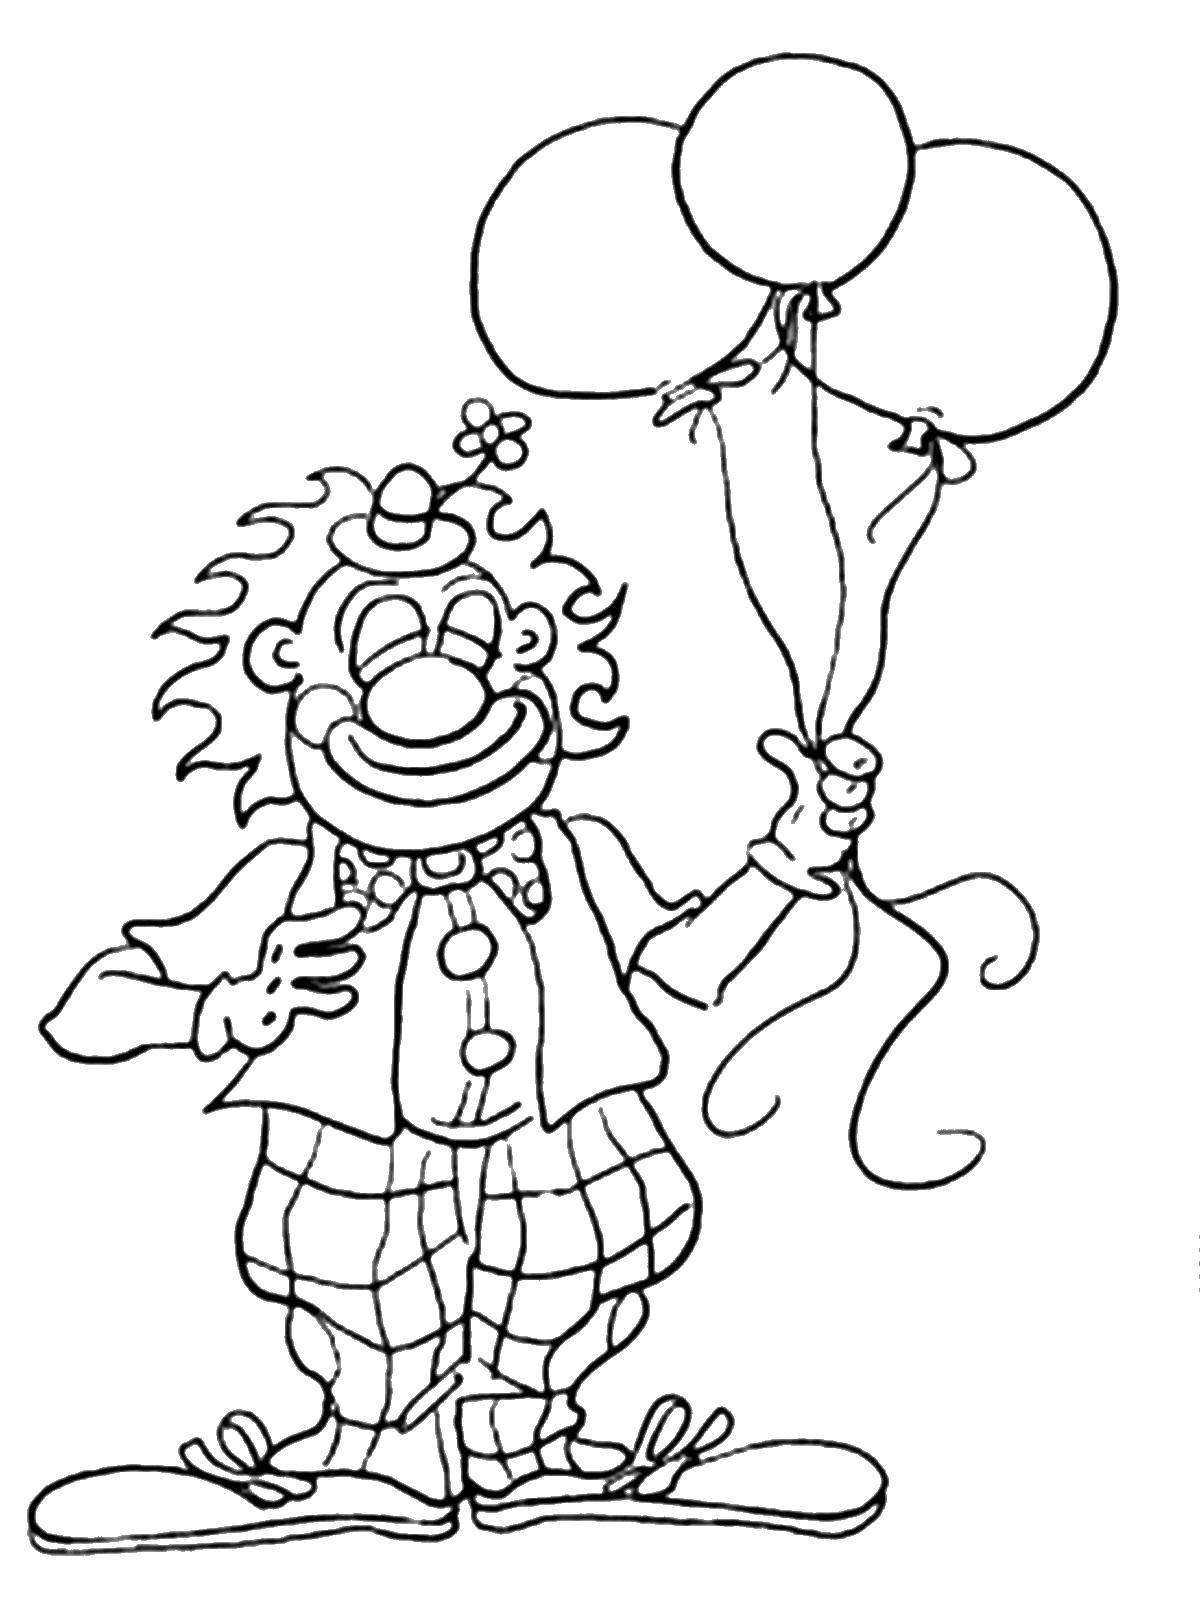 Coloring Clown with balloons. Category a profession. Tags:  a profession, a clown, balloons.